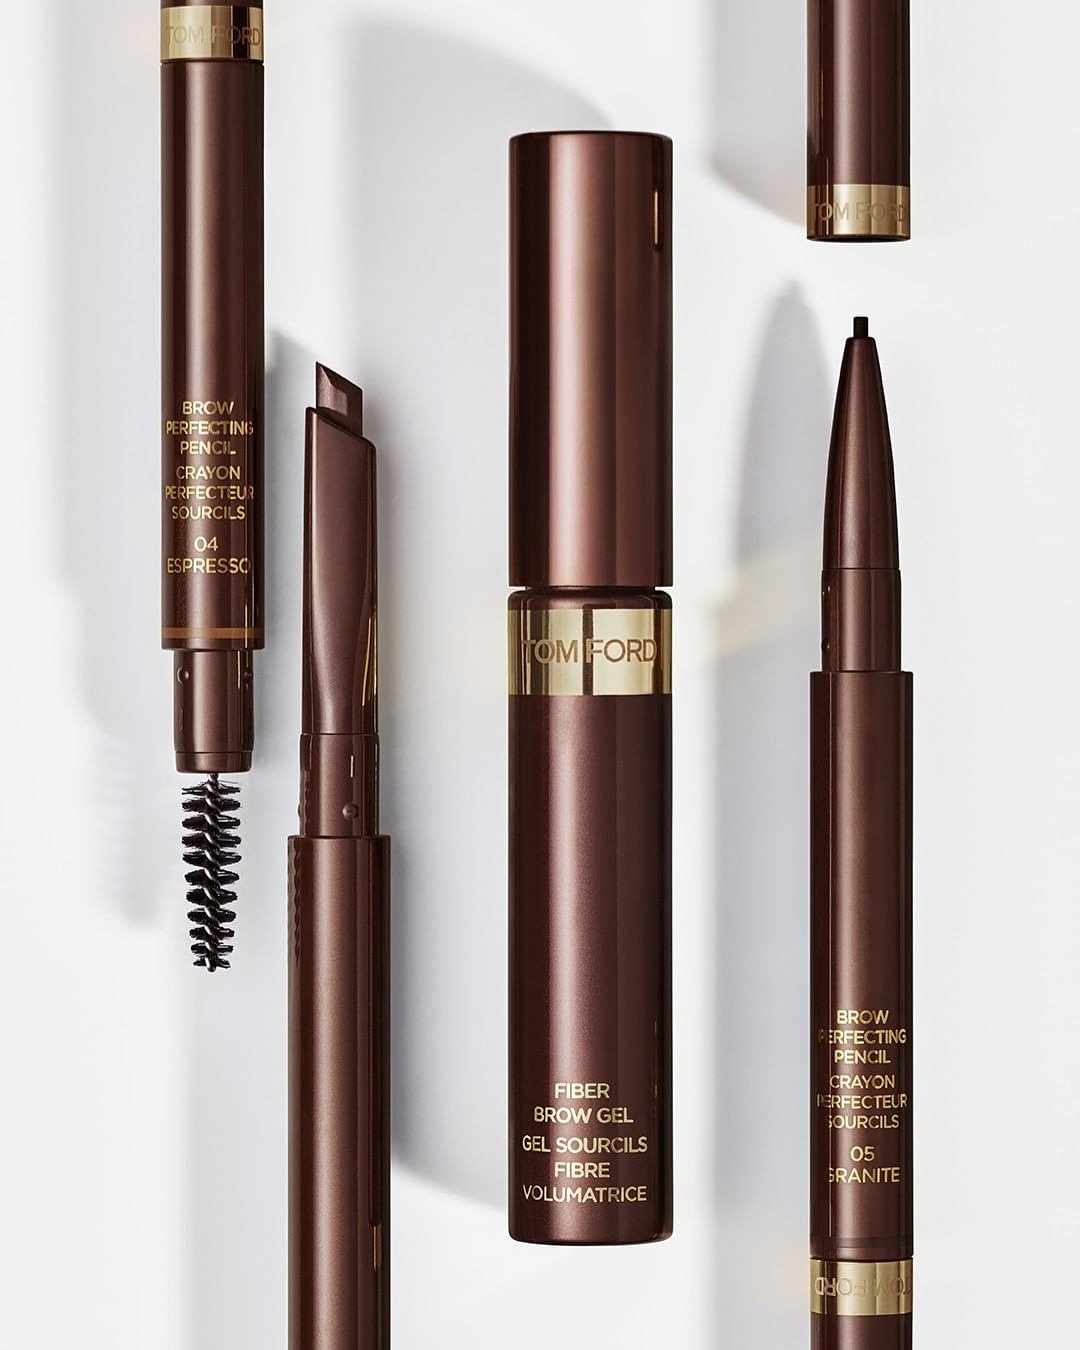 Paris Gallery on Twitter: "Micro-fine. Precise. Natural Finish. The Tom  Ford Brow Perfecting Pencil with a 1.5mm point effortlessly details brows  with expert exactness. Shown with the ultimate eyebrow icon – Tom